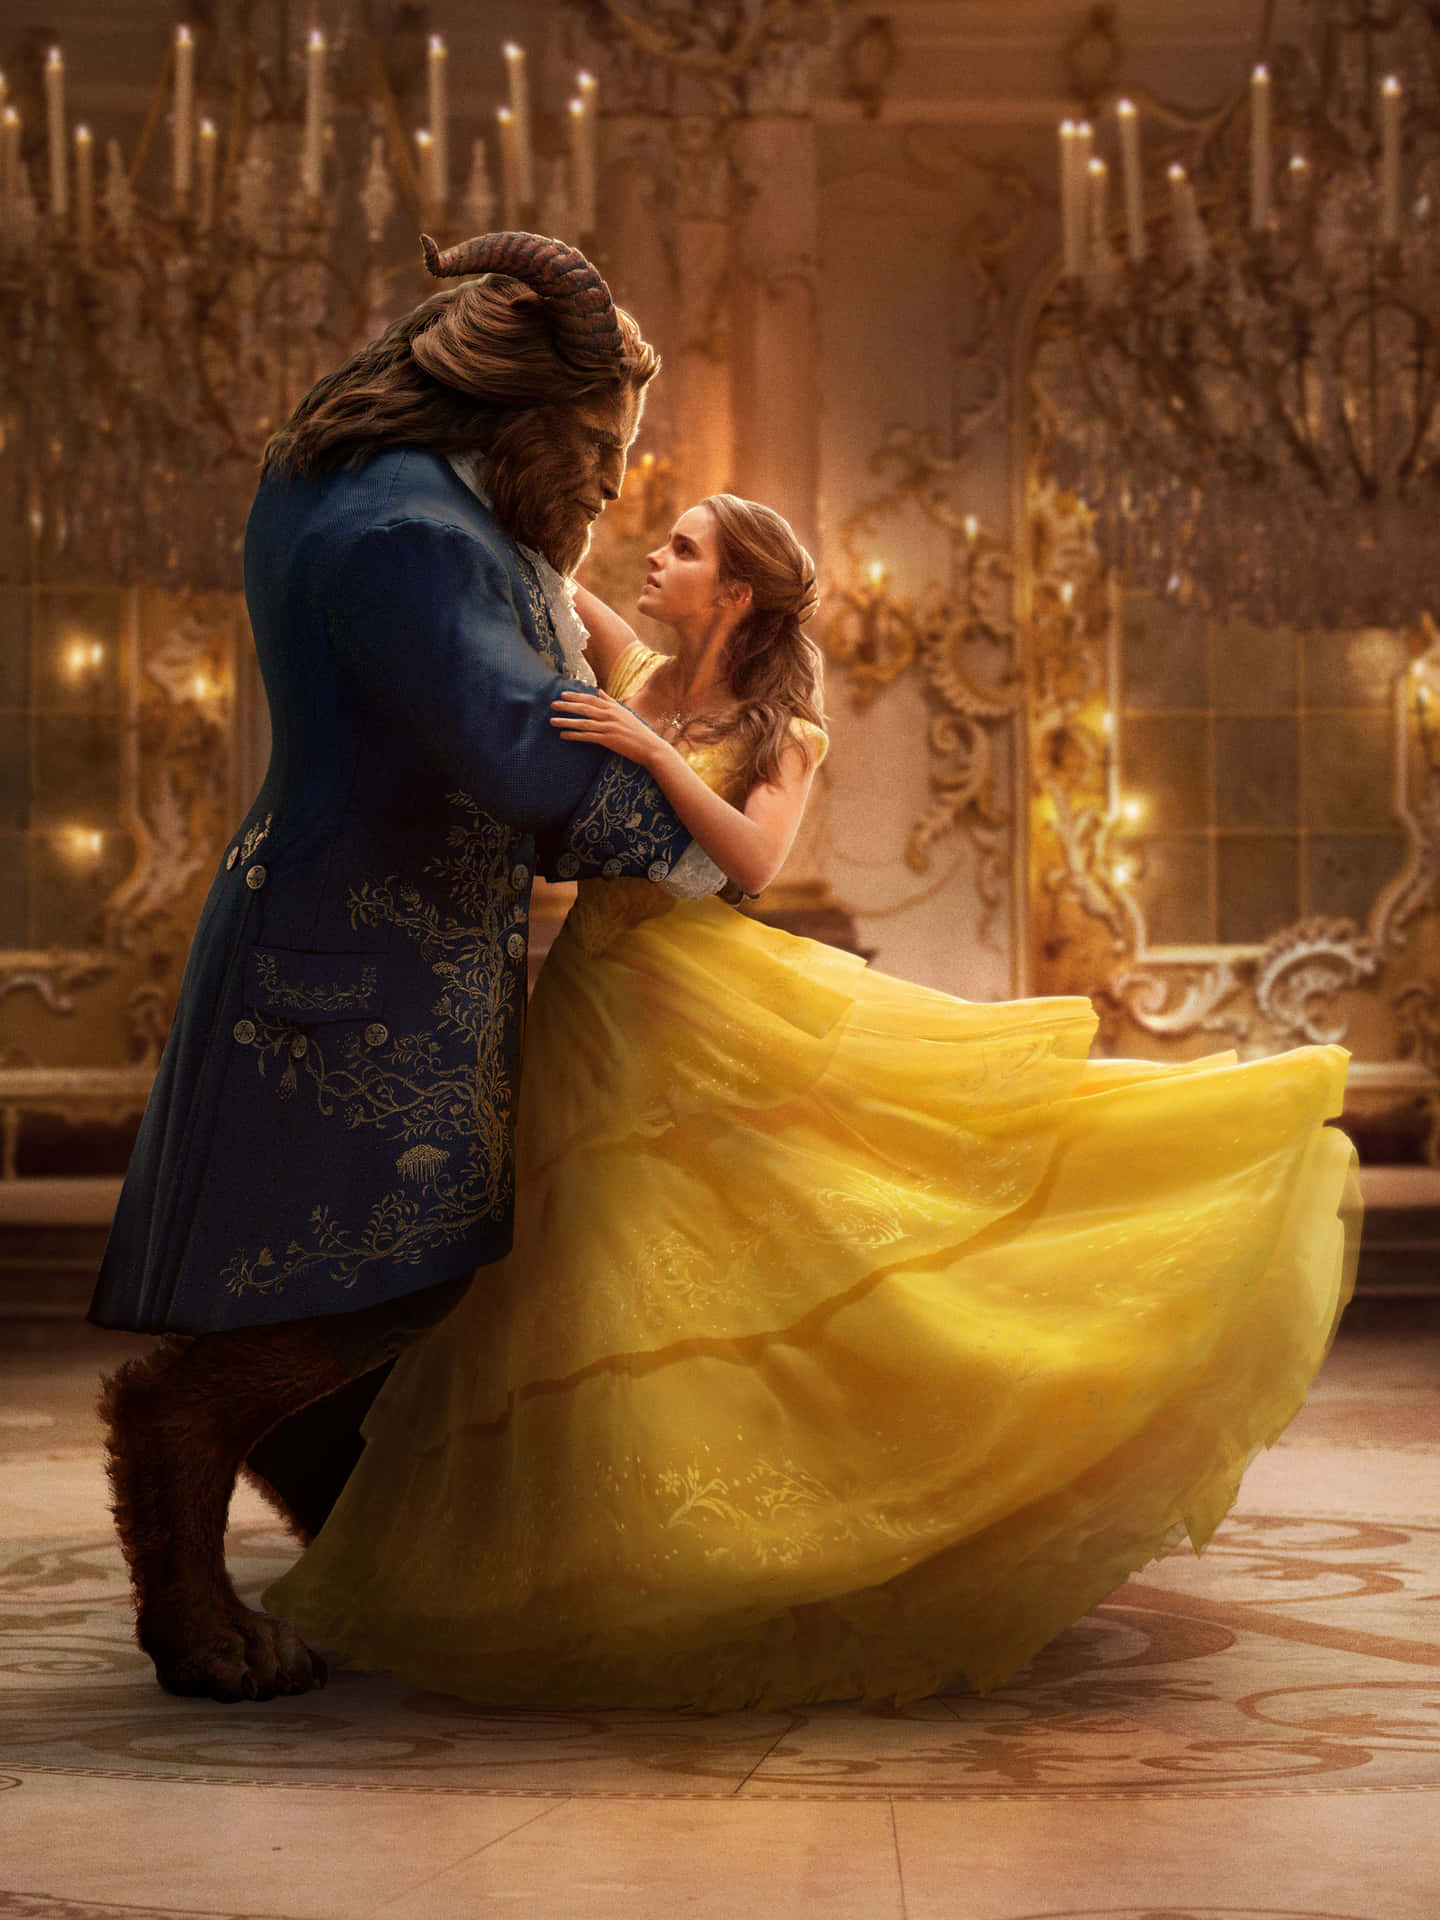 "Let's Fall In Love As Beauty And The Beast"